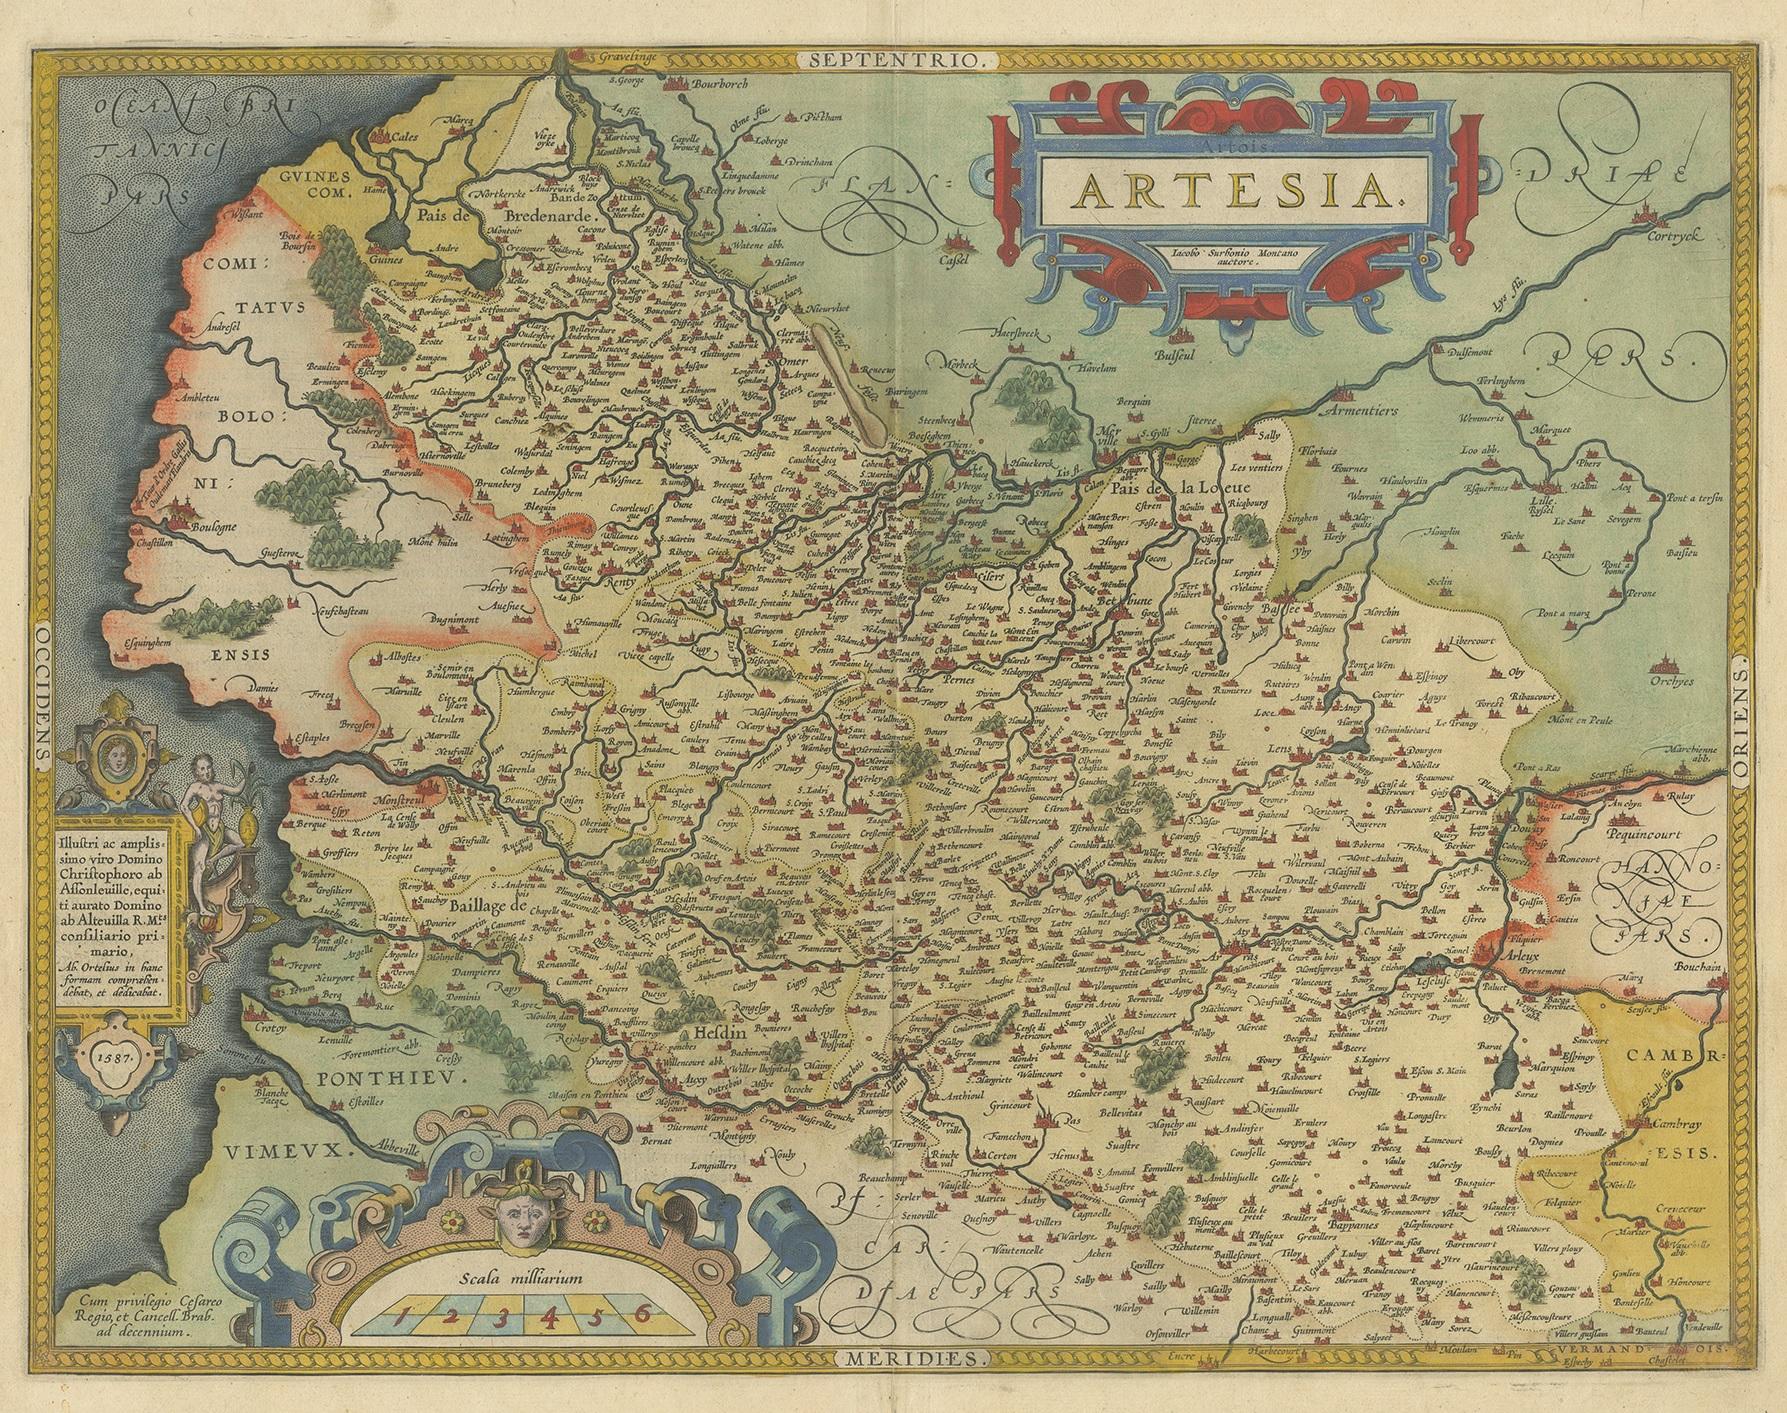 Antique map titled 'Artesia'. Original antique map of the Artois region, France. Published by A. Ortelius, circa 1590.